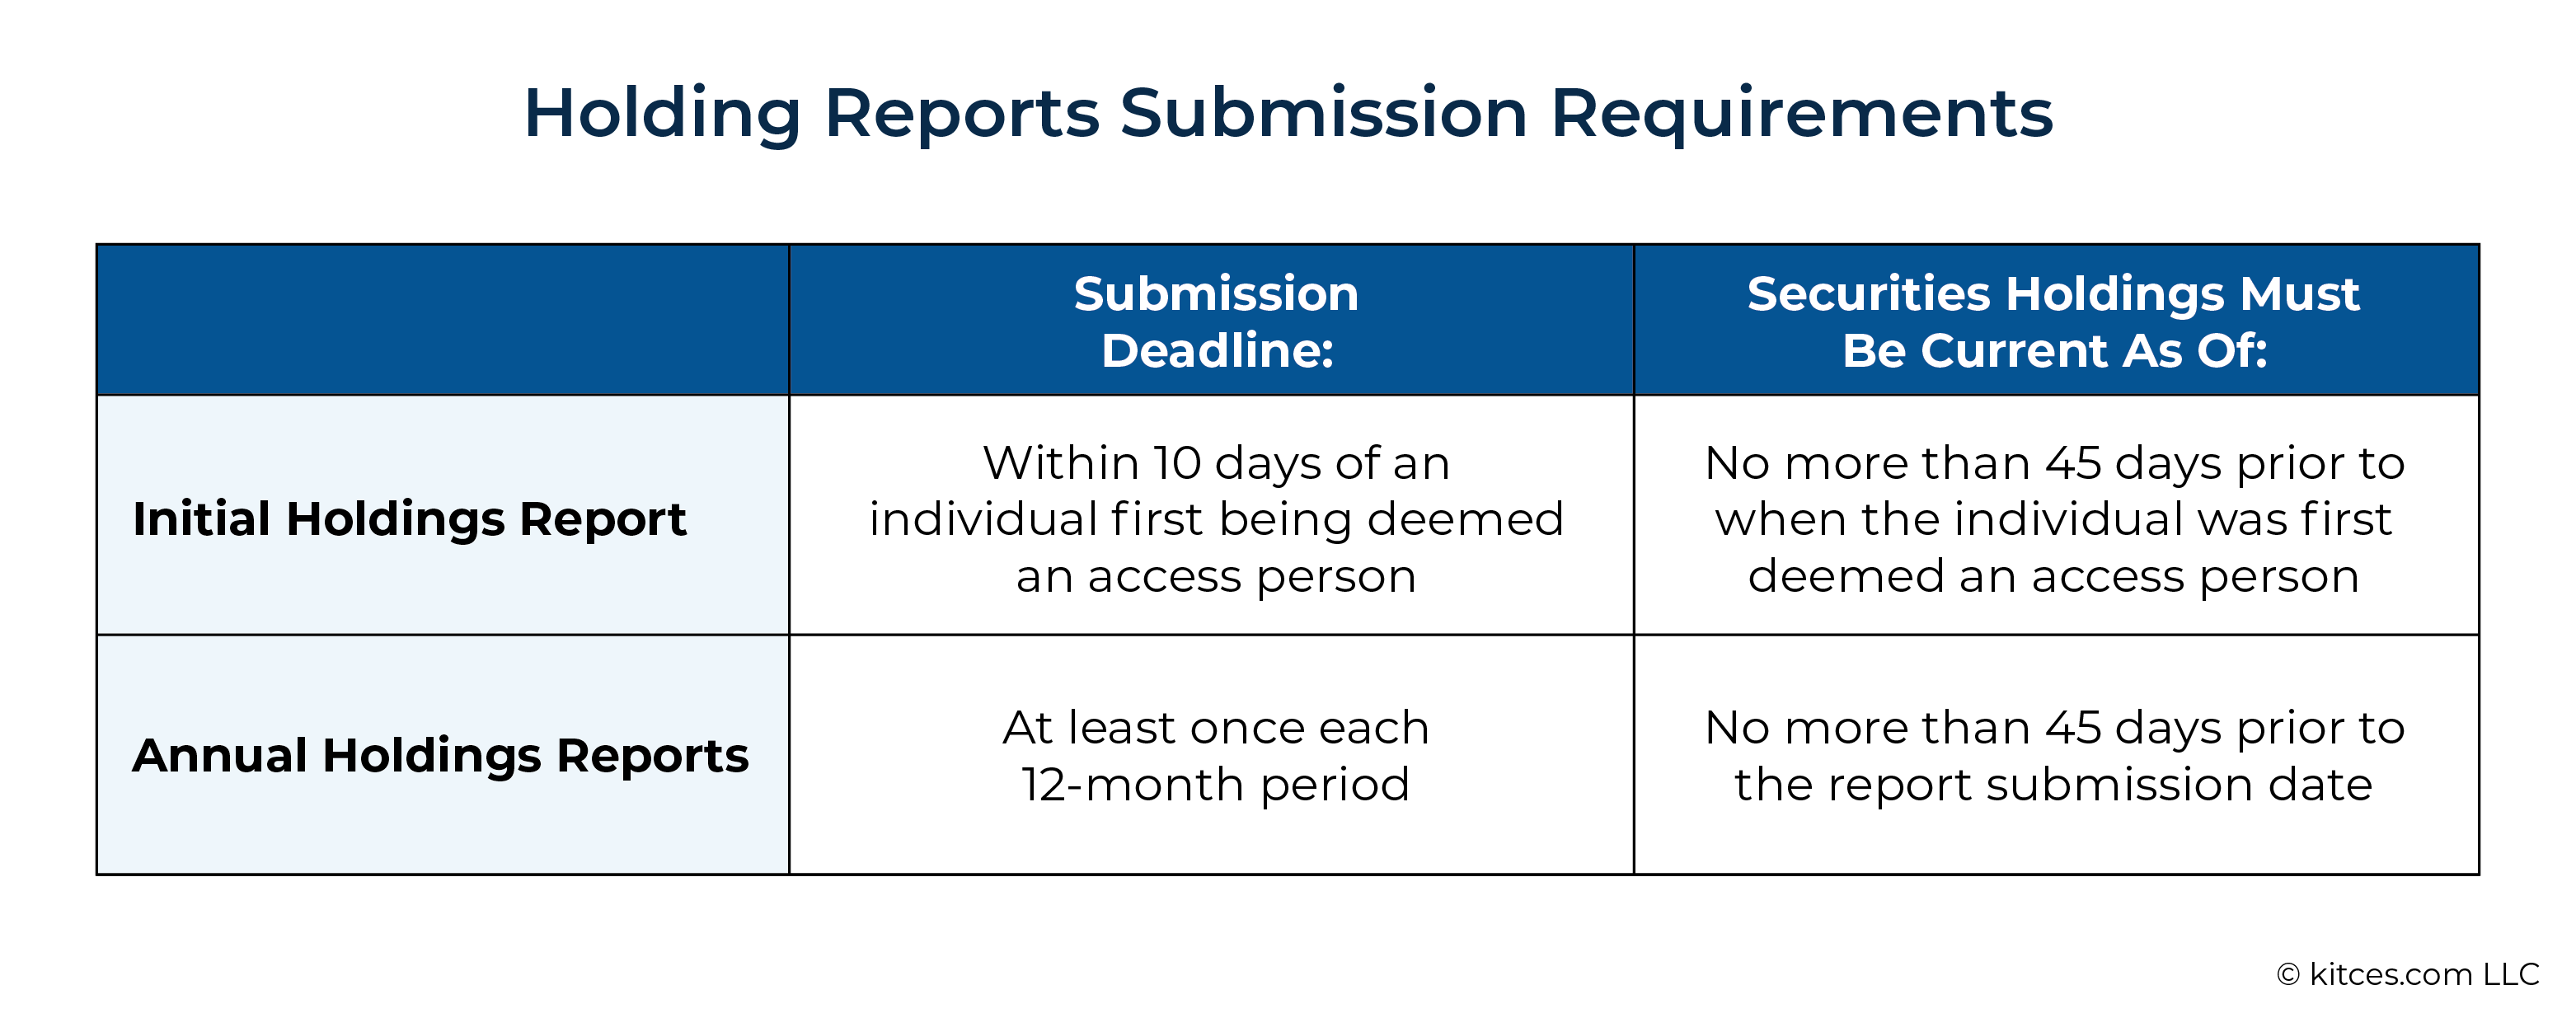 Holding Reports Submission Requirements